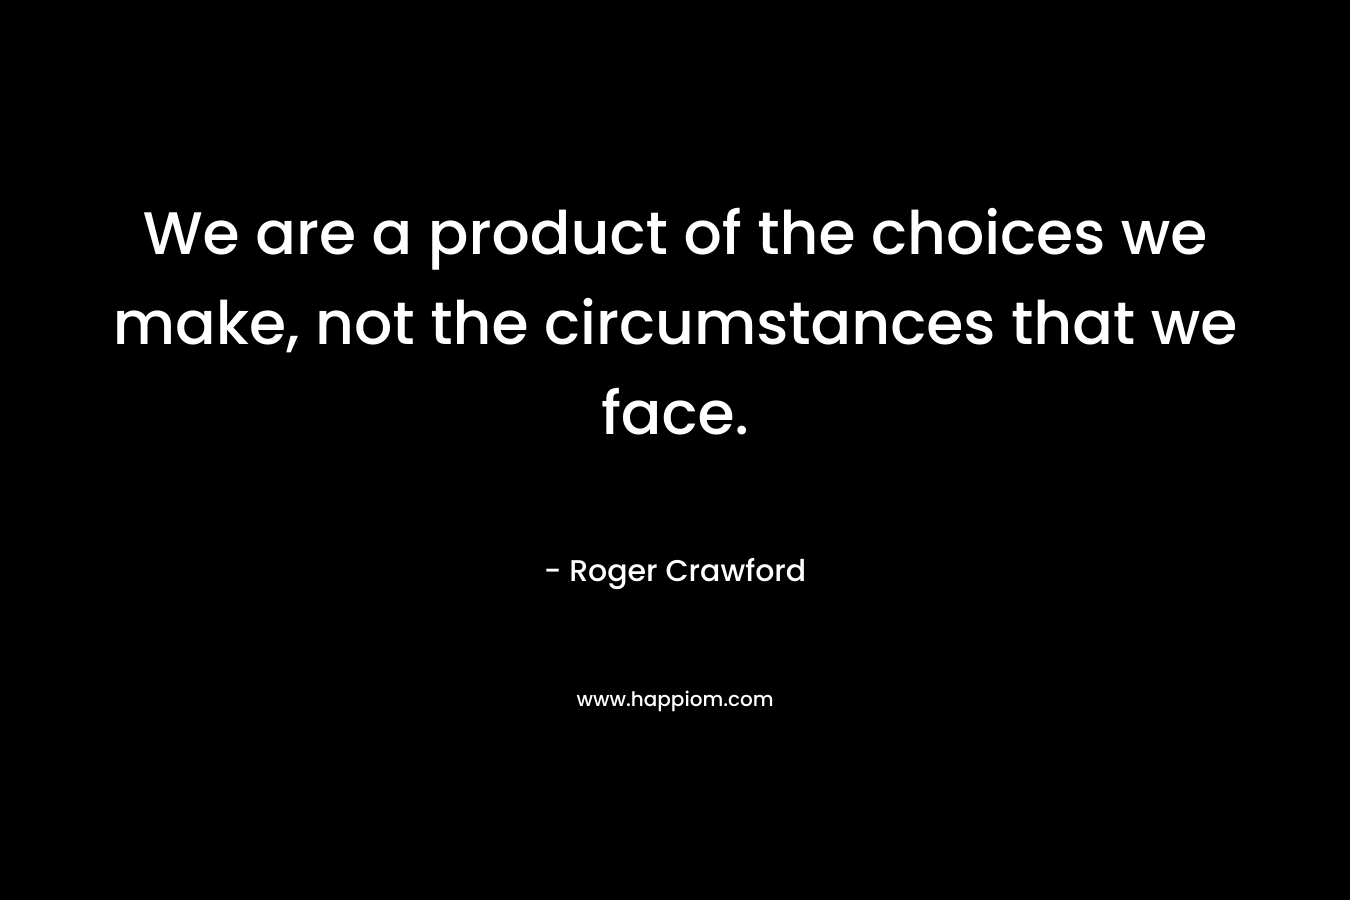 We are a product of the choices we make, not the circumstances that we face. – Roger Crawford